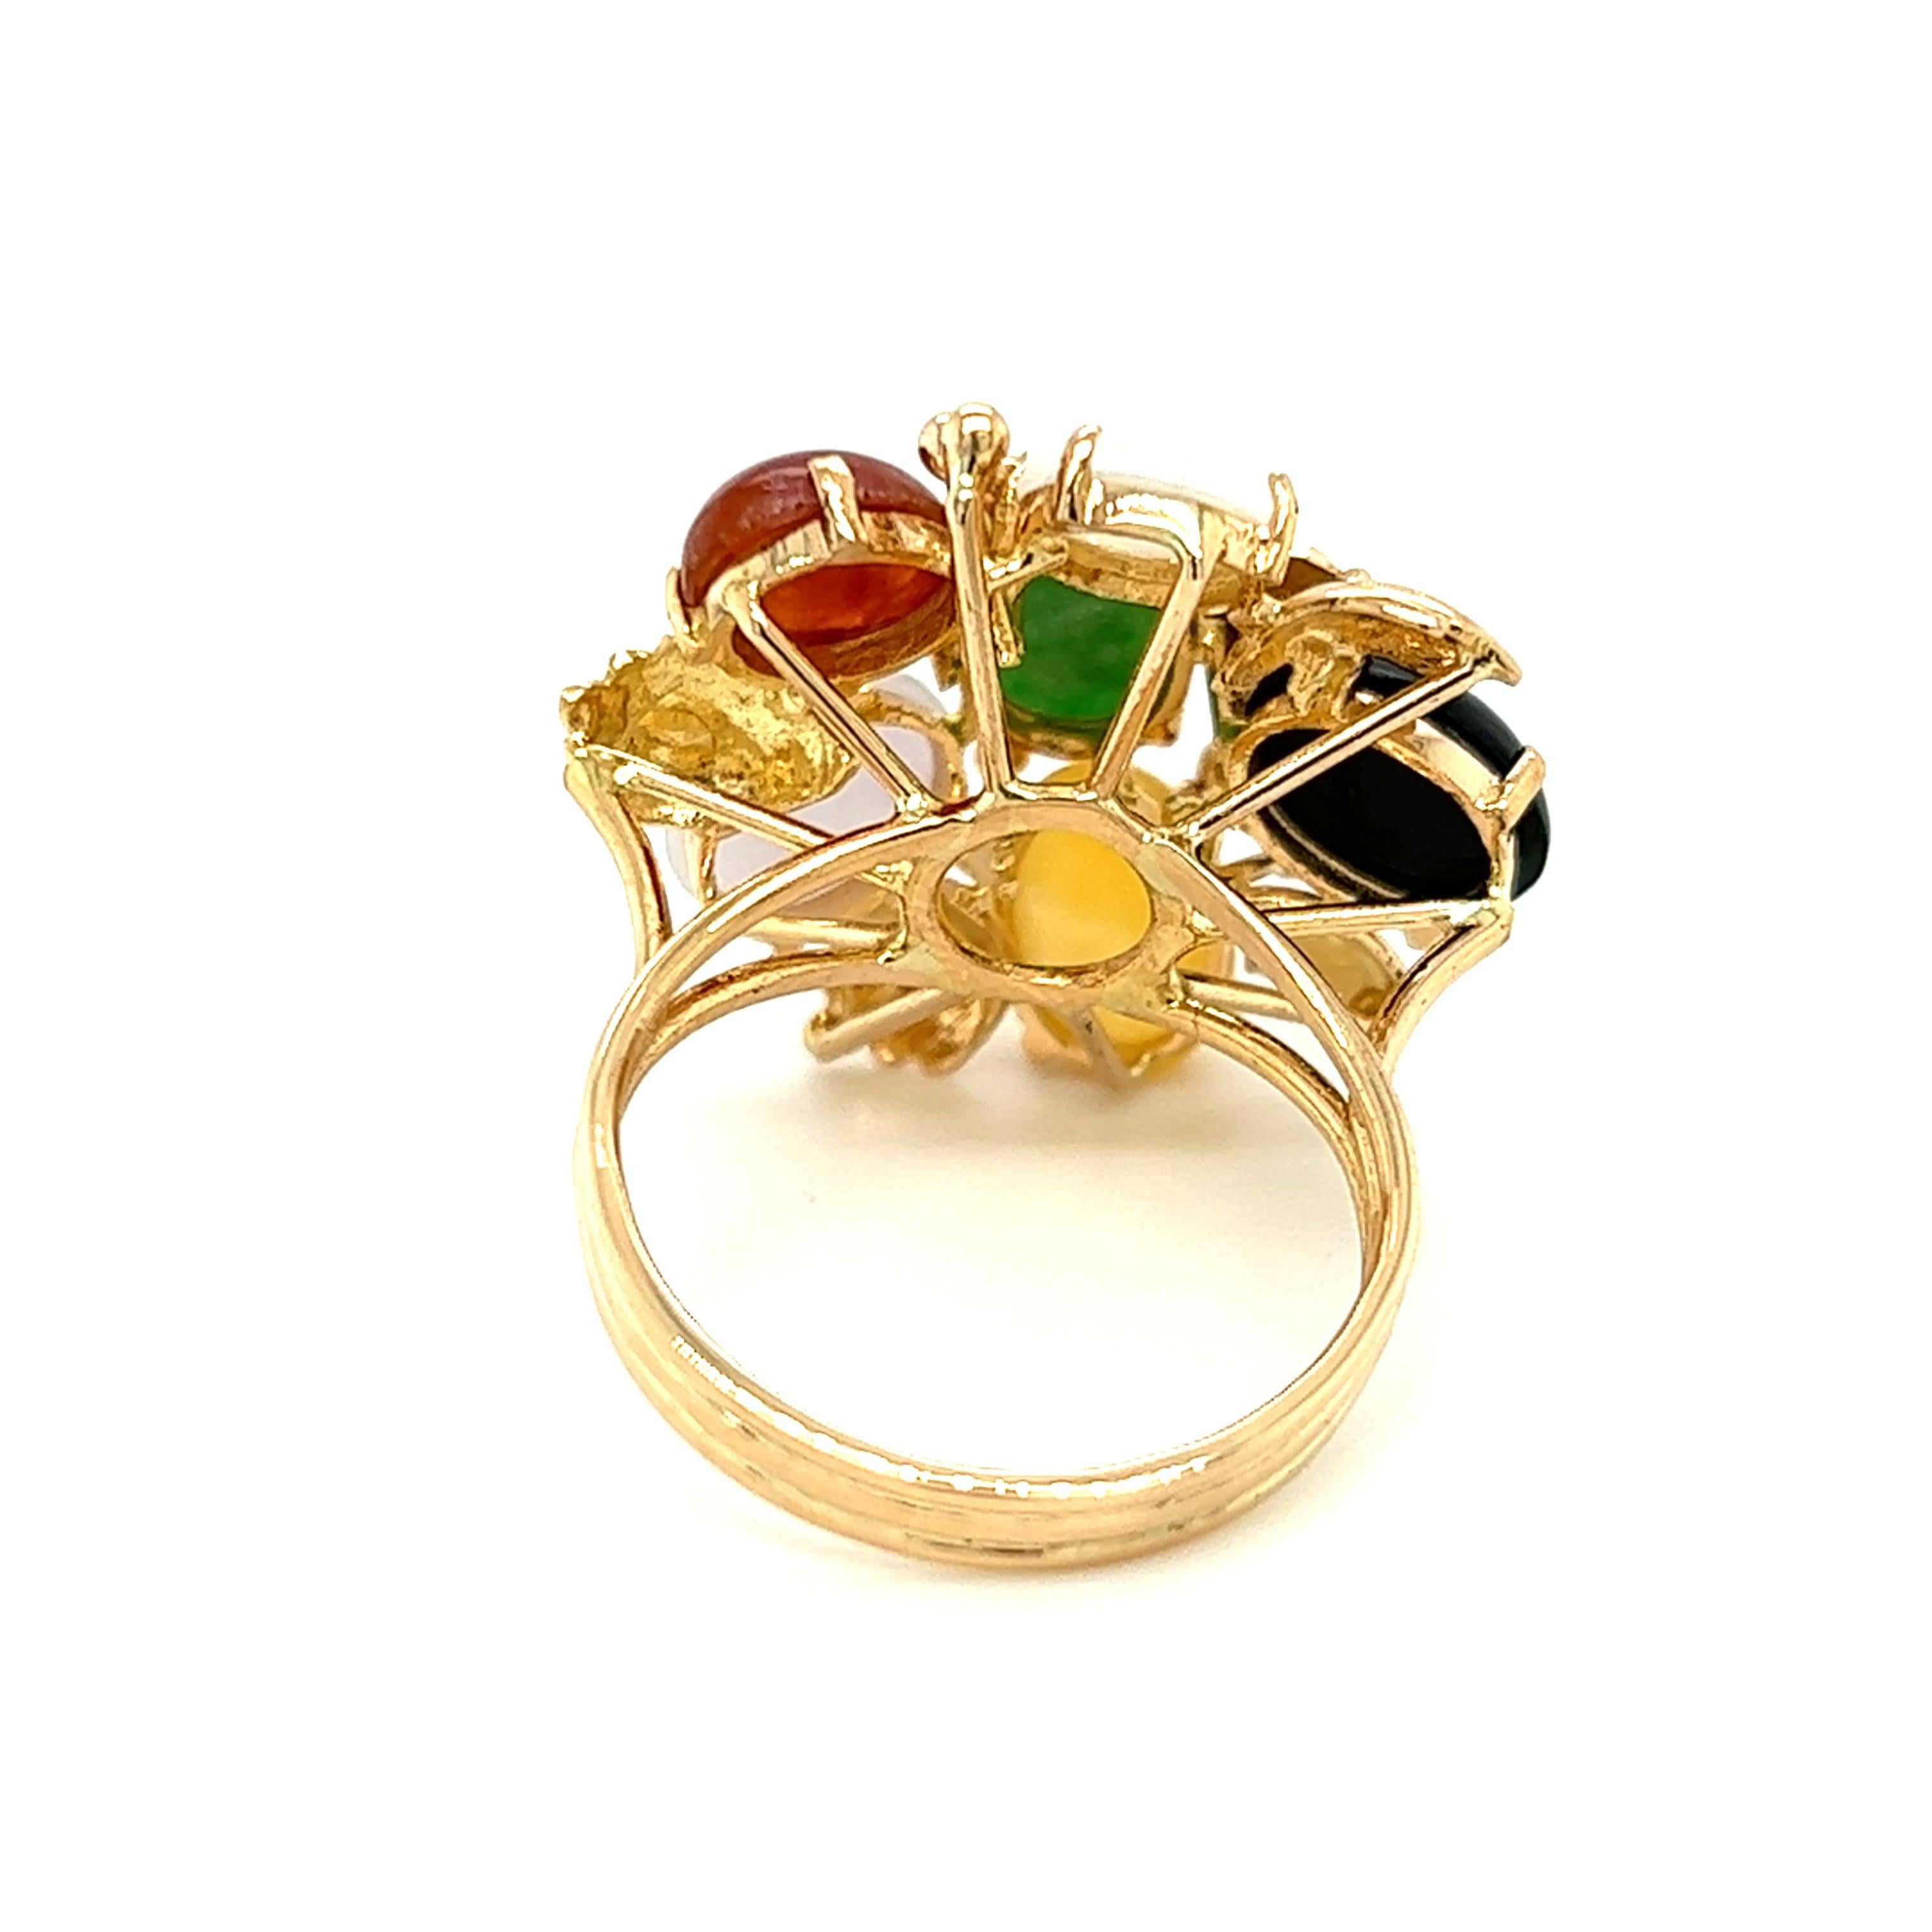 The multi-colored jade ring has six 8x6 genuine jade gemstones with natural multi-colored pieces of jade. The gorgeous cluster jade ring has a center, traditional green jade gemstone set in four prongs. The green jade gemstones are framed by genuine